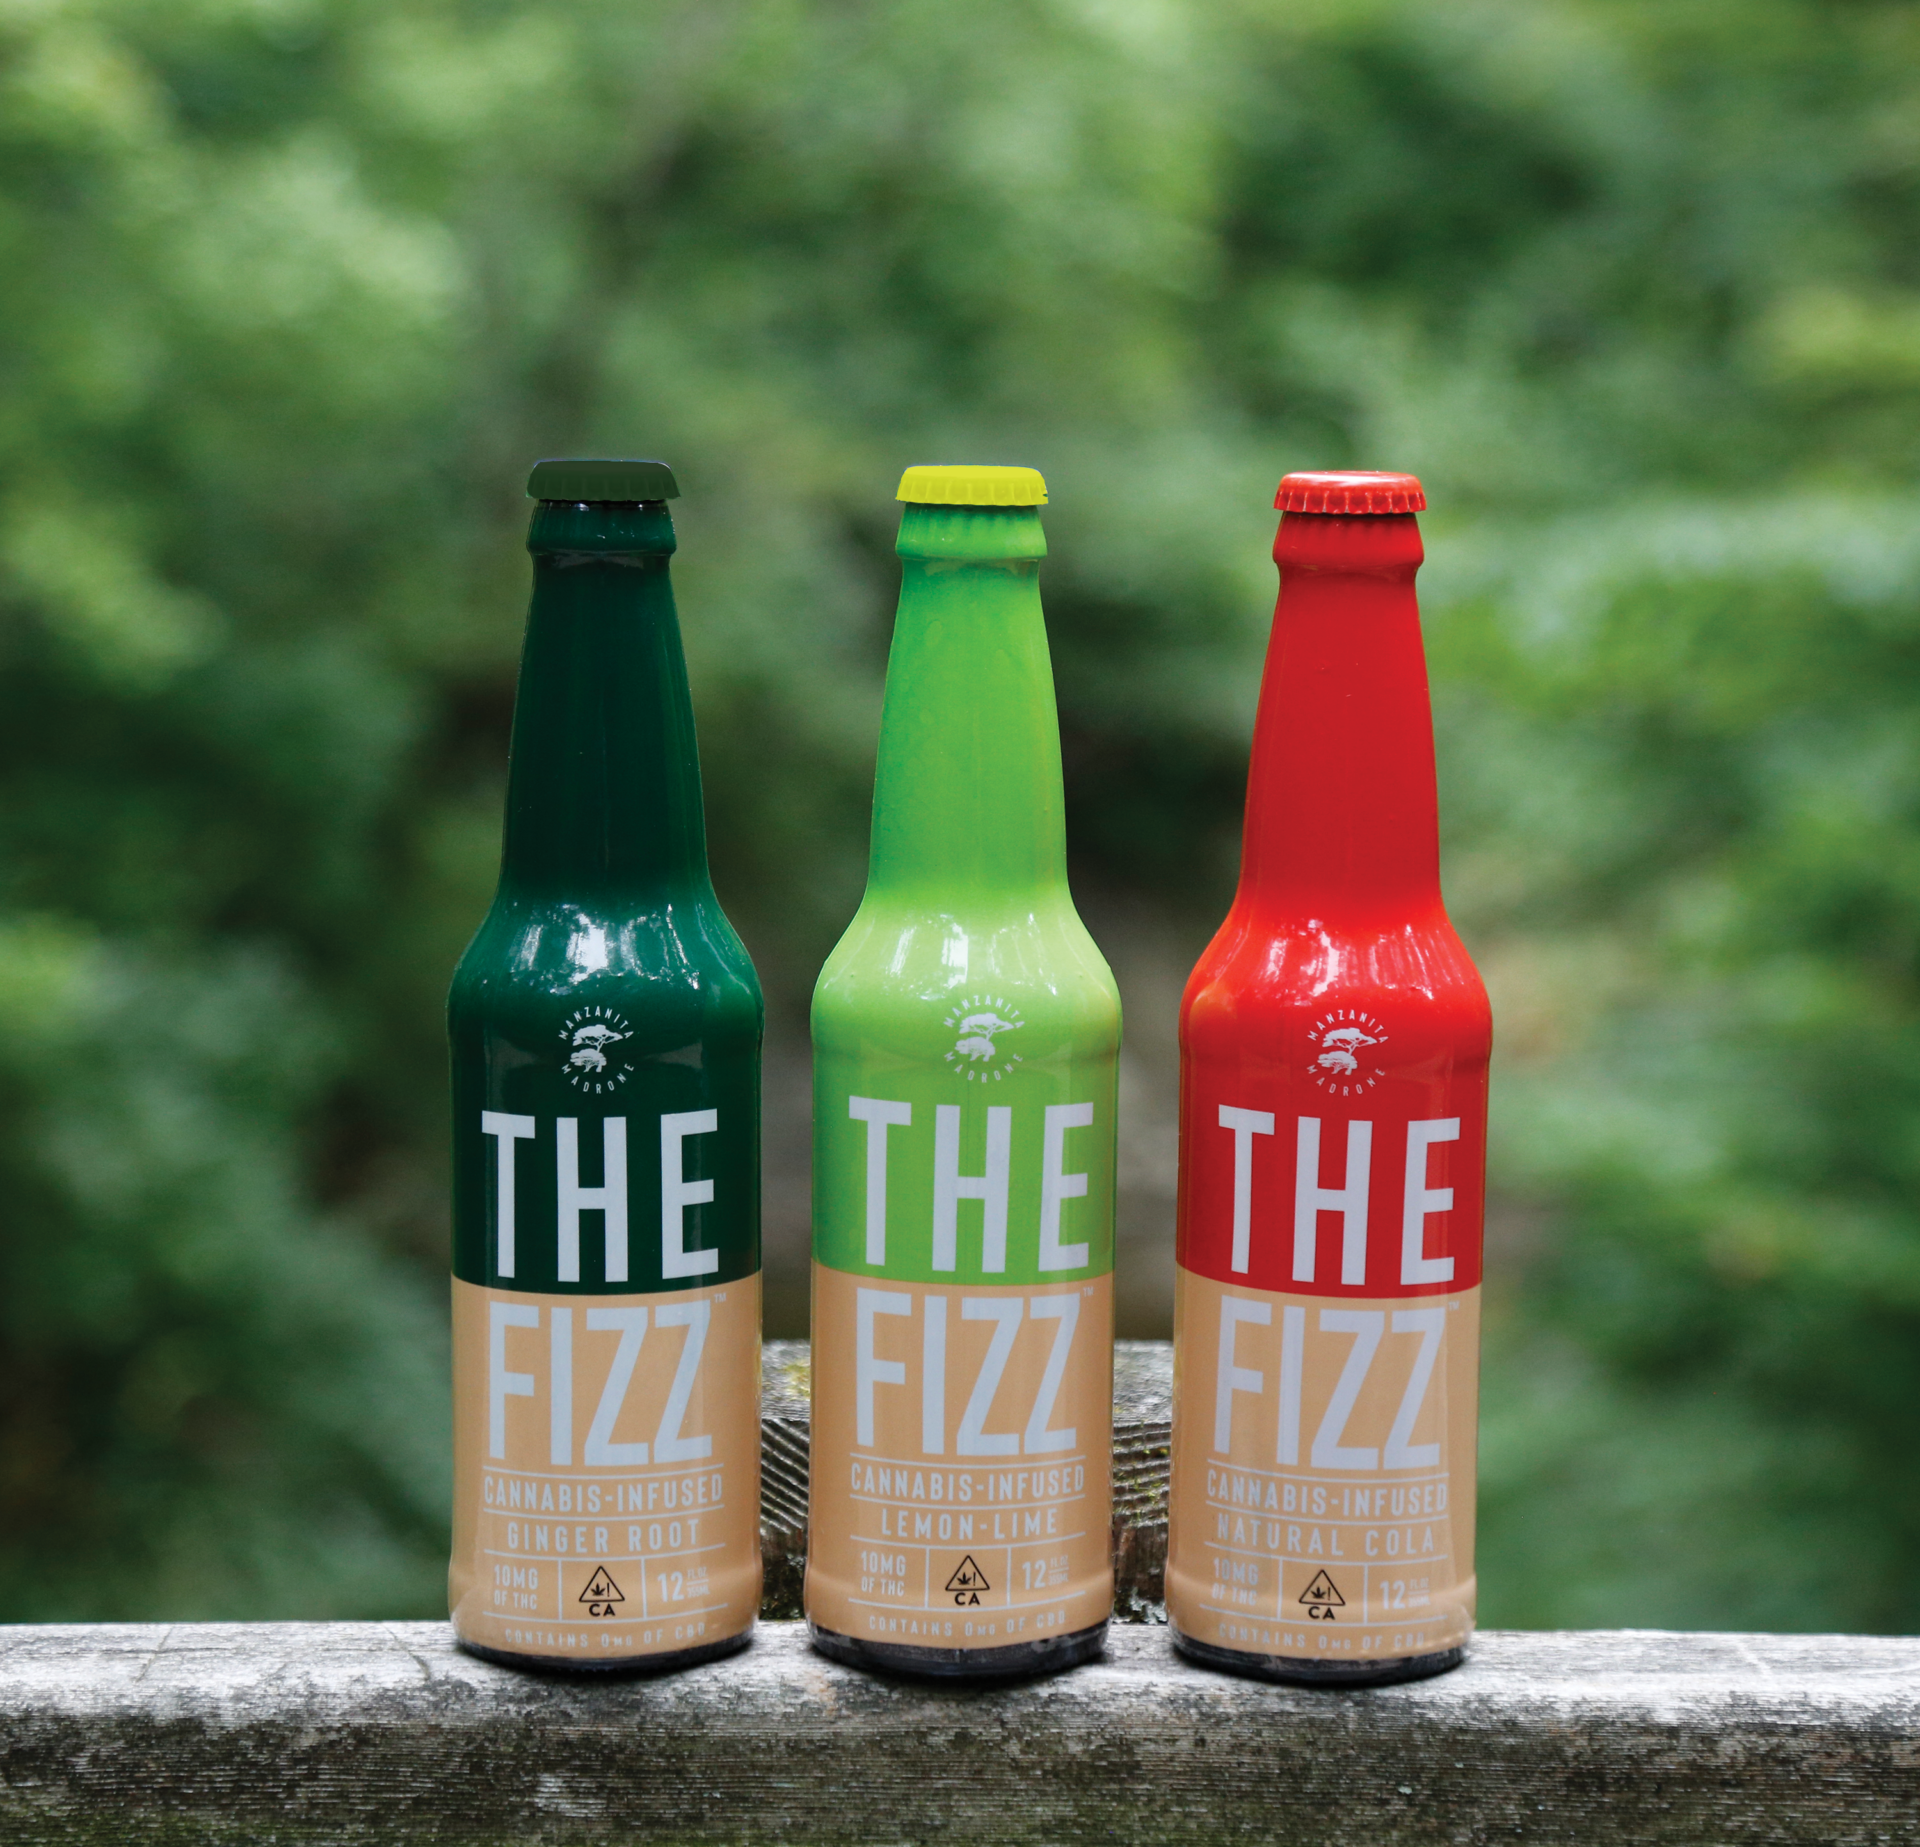 The three THC-infused flavors of The Fizz from Manzanita and Madrone.